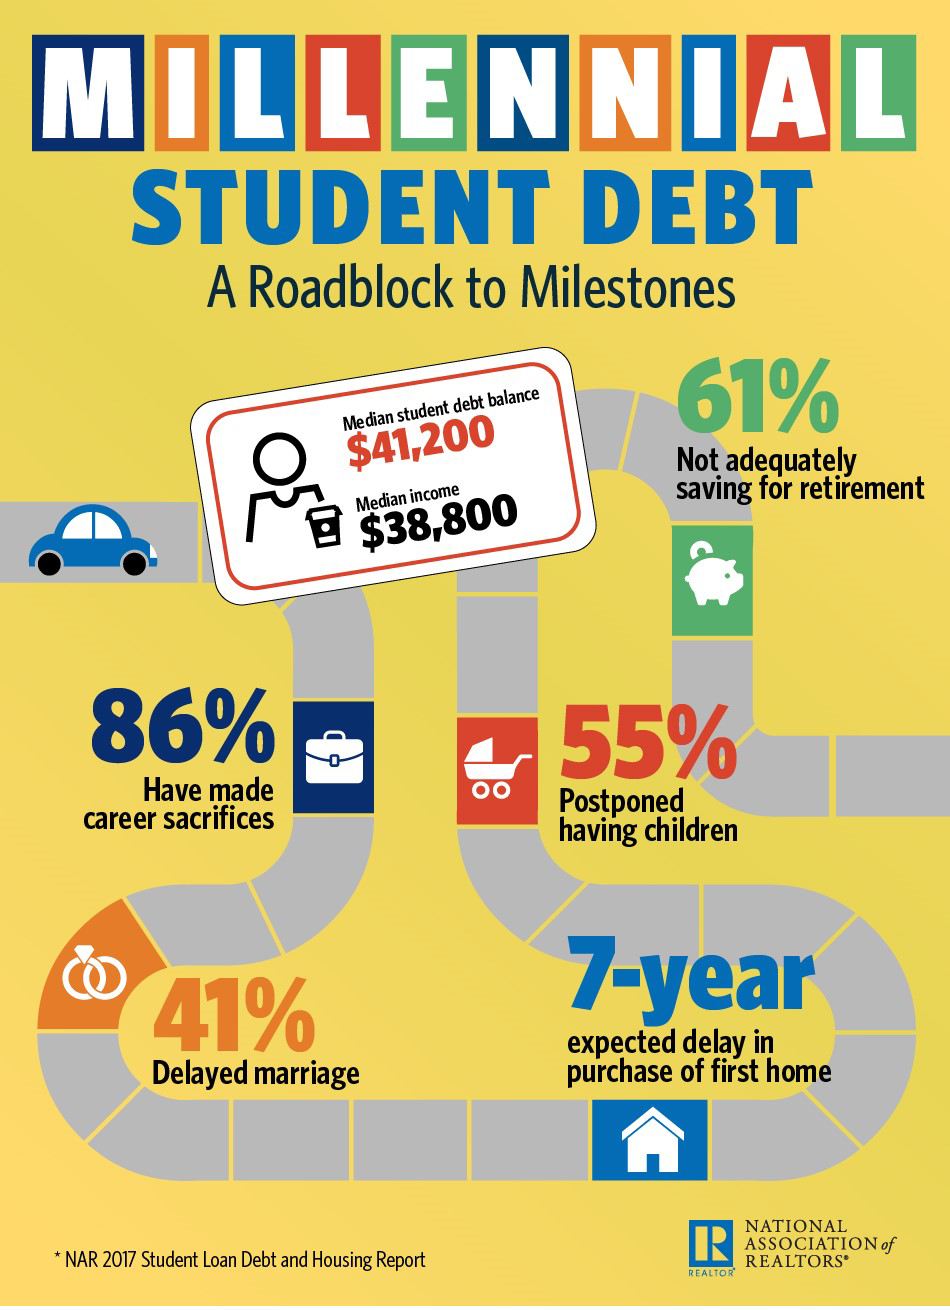 Student Debt Delaying Millennial Homeownership by 7 Years